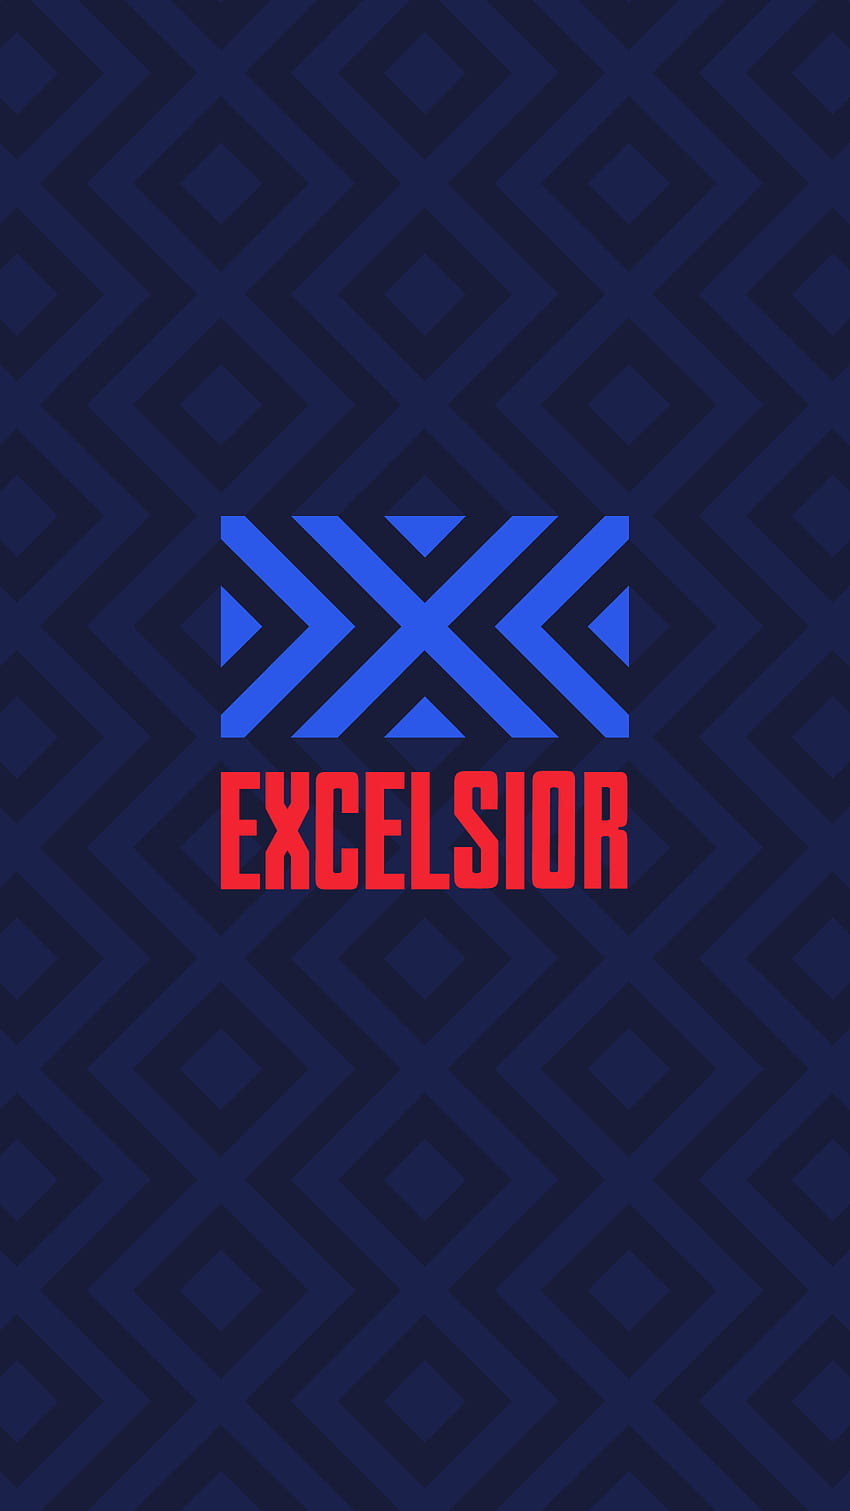 HD excelsior wallpapers | Peakpx